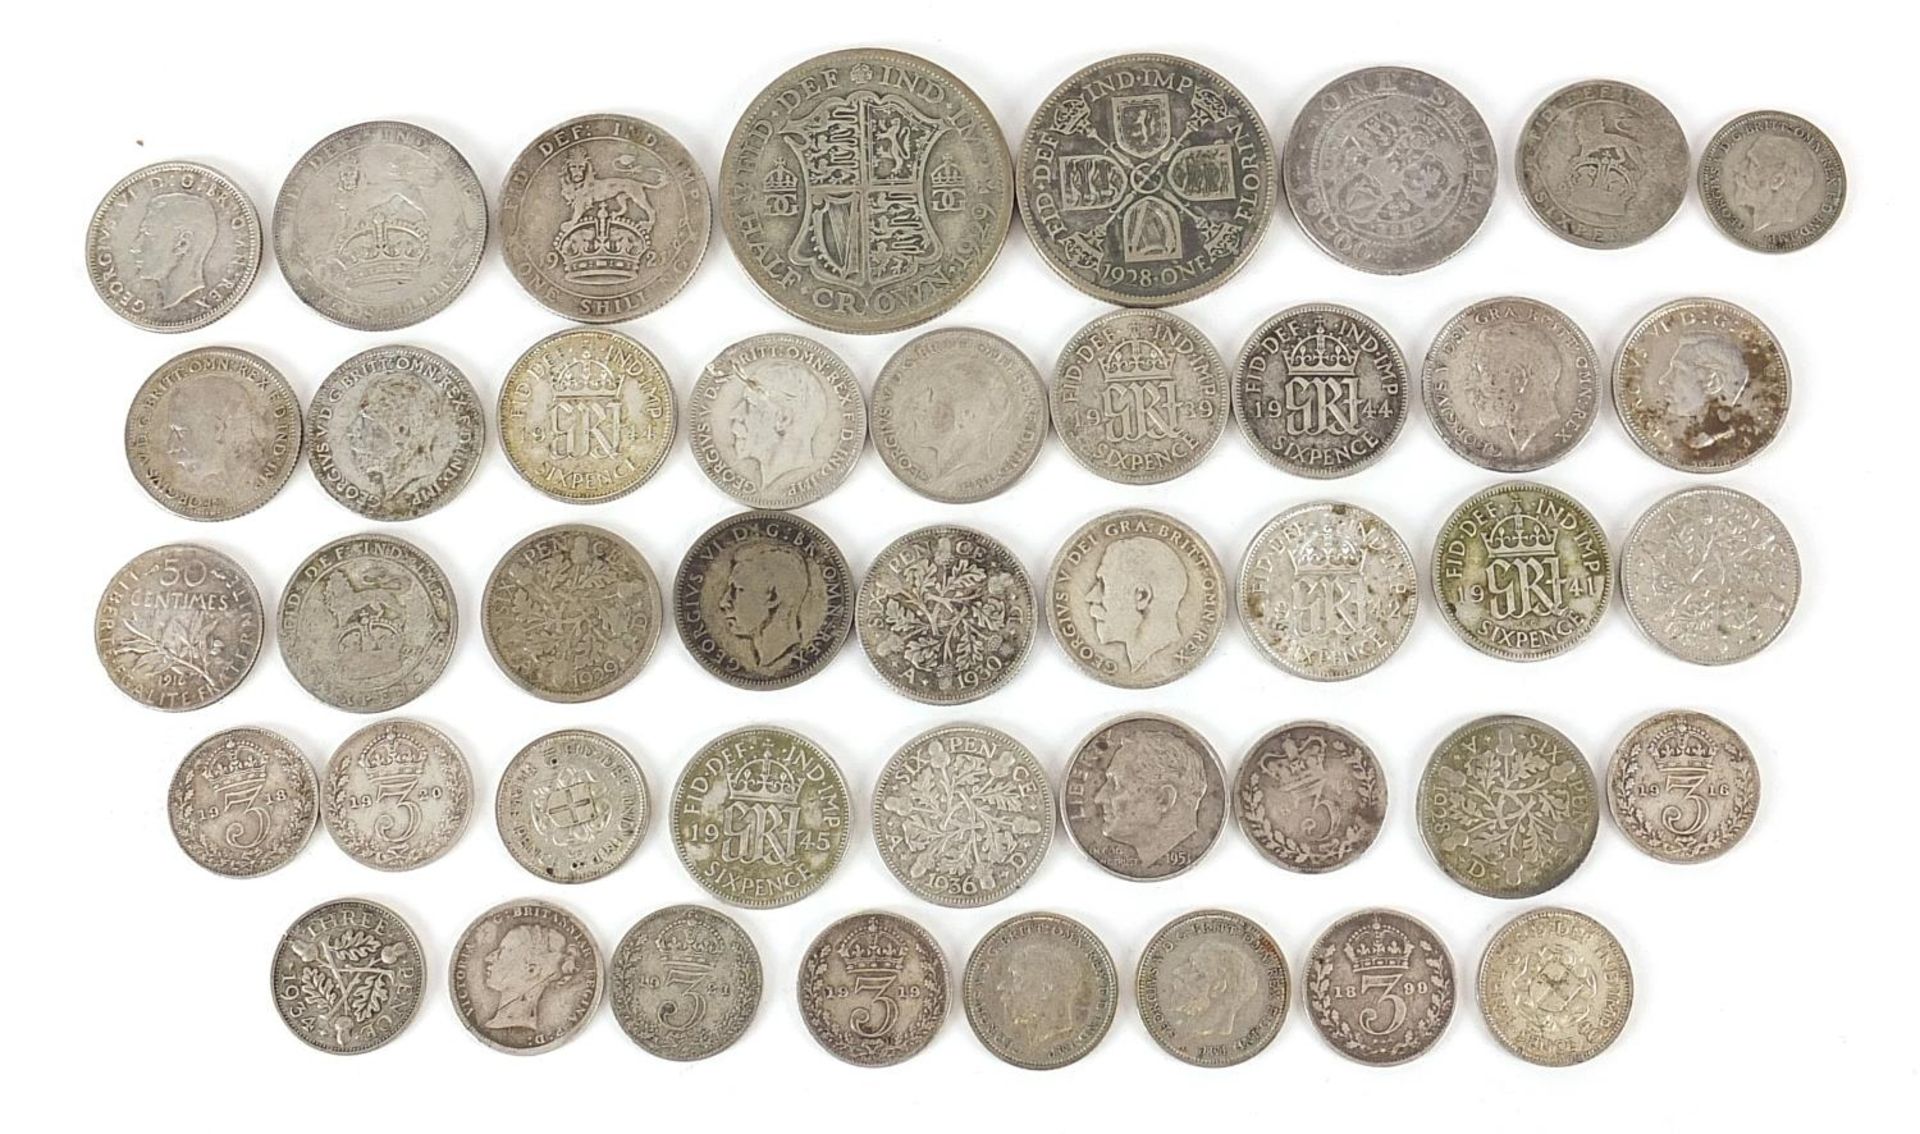 British pre decimal coins including half crowns and sixpences, 126.0g